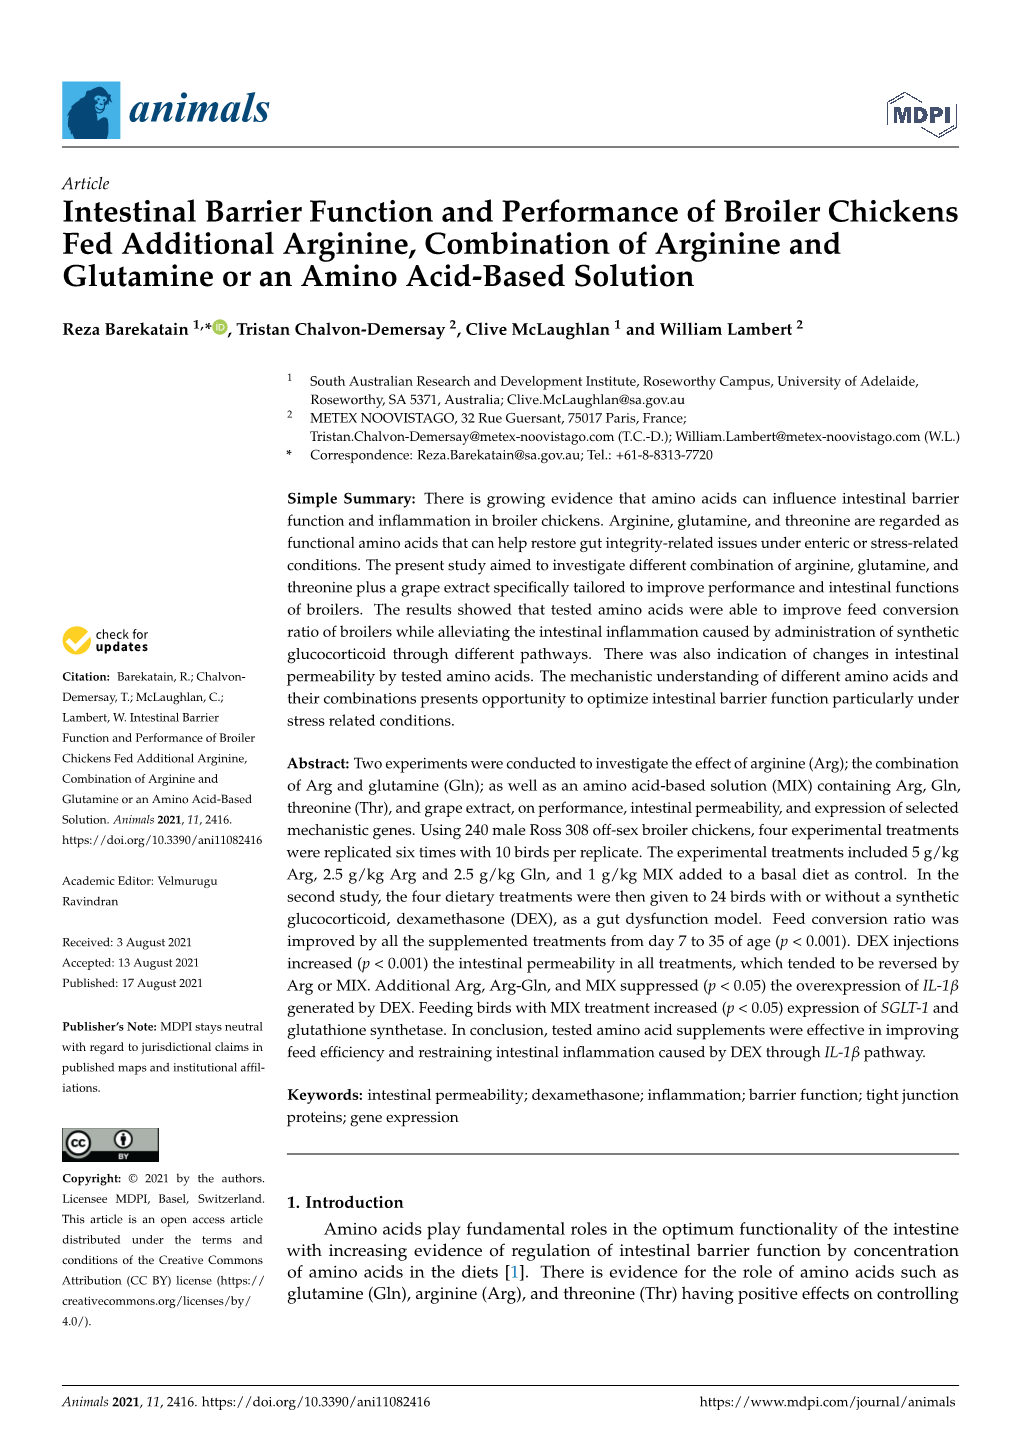 Intestinal Barrier Function and Performance of Broiler Chickens Fed Additional Arginine, Combination of Arginine and Glutamine Or an Amino Acid-Based Solution